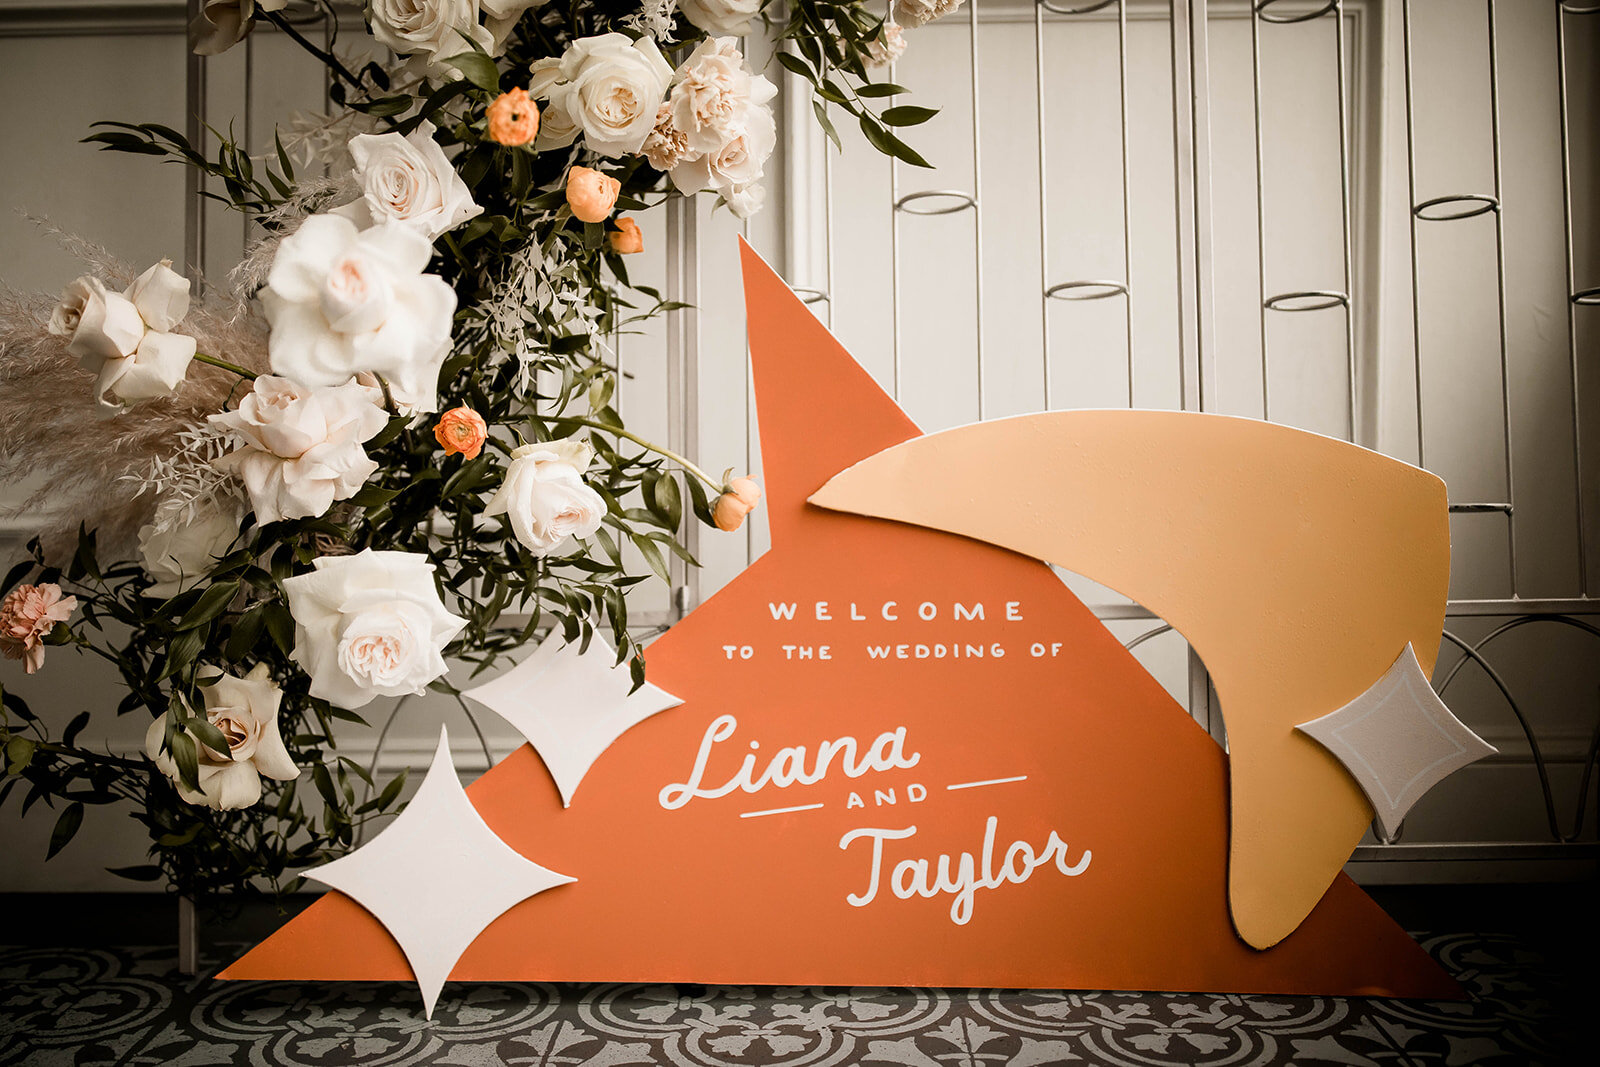 quirky_wedding_cool_signage